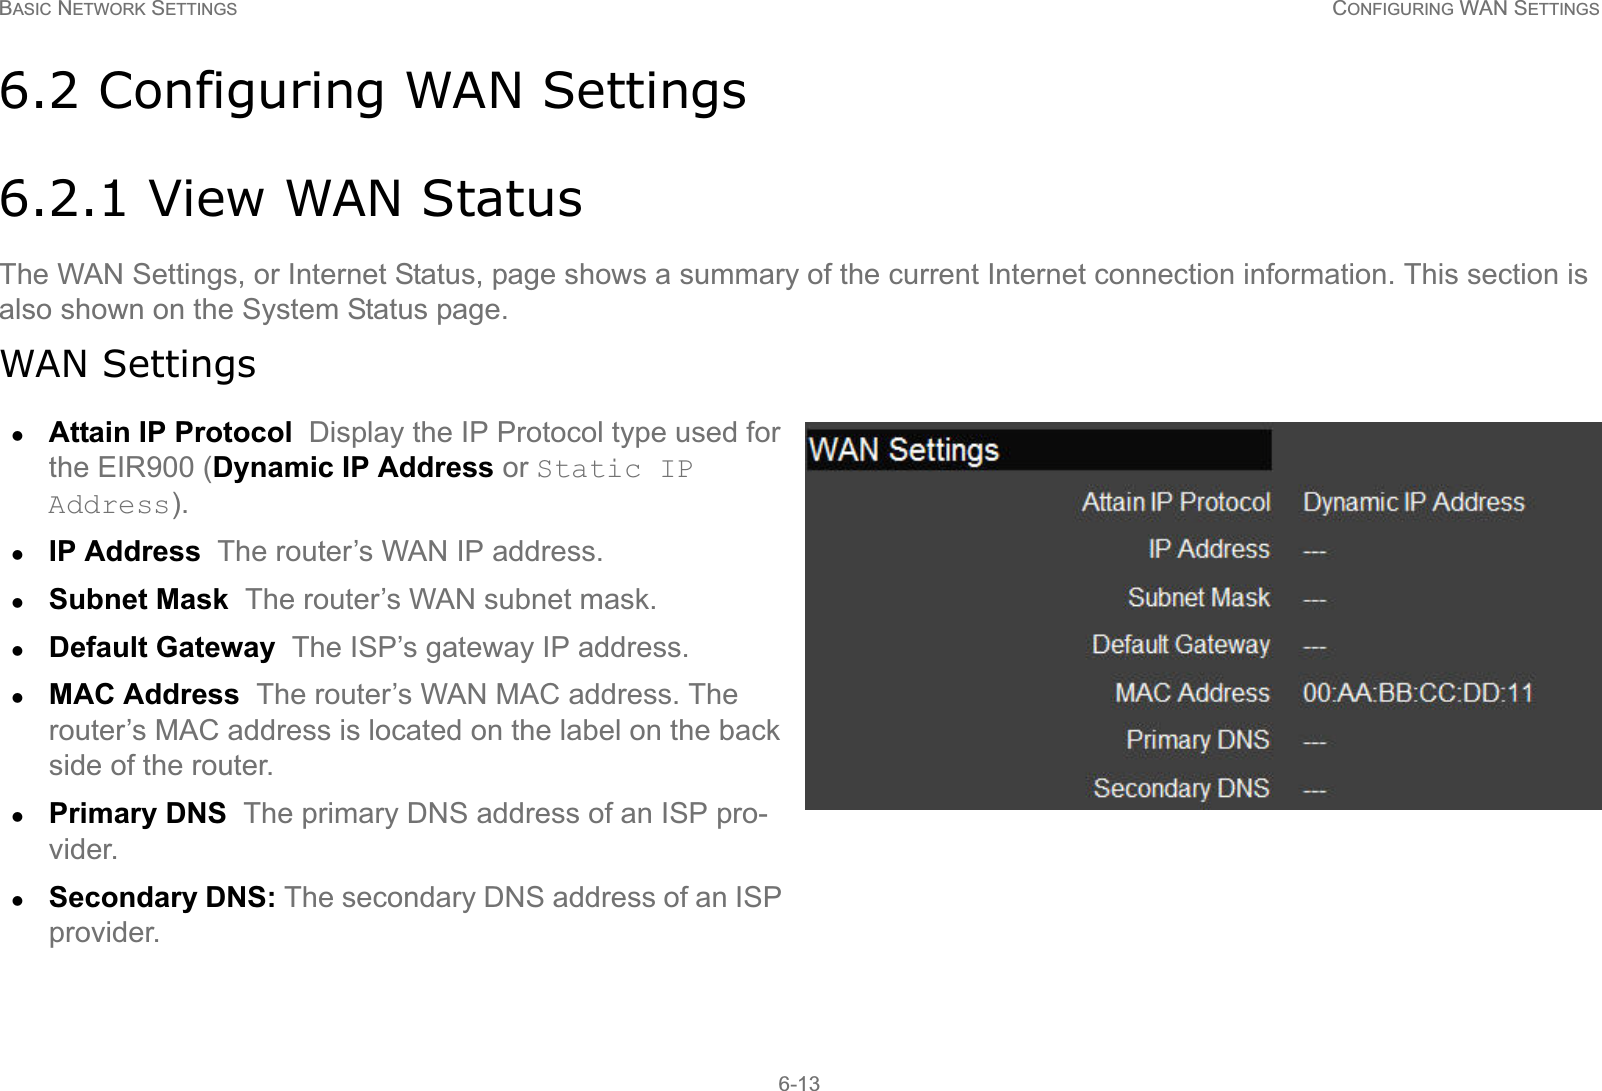 BASIC NETWORK SETTINGS CONFIGURING WAN SETTINGS6-136.2 Configuring WAN Settings6.2.1 View WAN StatusThe WAN Settings, or Internet Status, page shows a summary of the current Internet connection information. This section is also shown on the System Status page.WAN SettingszAttain IP Protocol  Display the IP Protocol type used for the EIR900 (Dynamic IP Address or Static IP Address).zIP Address  The router’s WAN IP address.zSubnet Mask  The router’s WAN subnet mask.zDefault Gateway  The ISP’s gateway IP address.zMAC Address  The router’s WAN MAC address. The router’s MAC address is located on the label on the back side of the router.zPrimary DNS  The primary DNS address of an ISP pro-vider.zSecondary DNS: The secondary DNS address of an ISP provider.